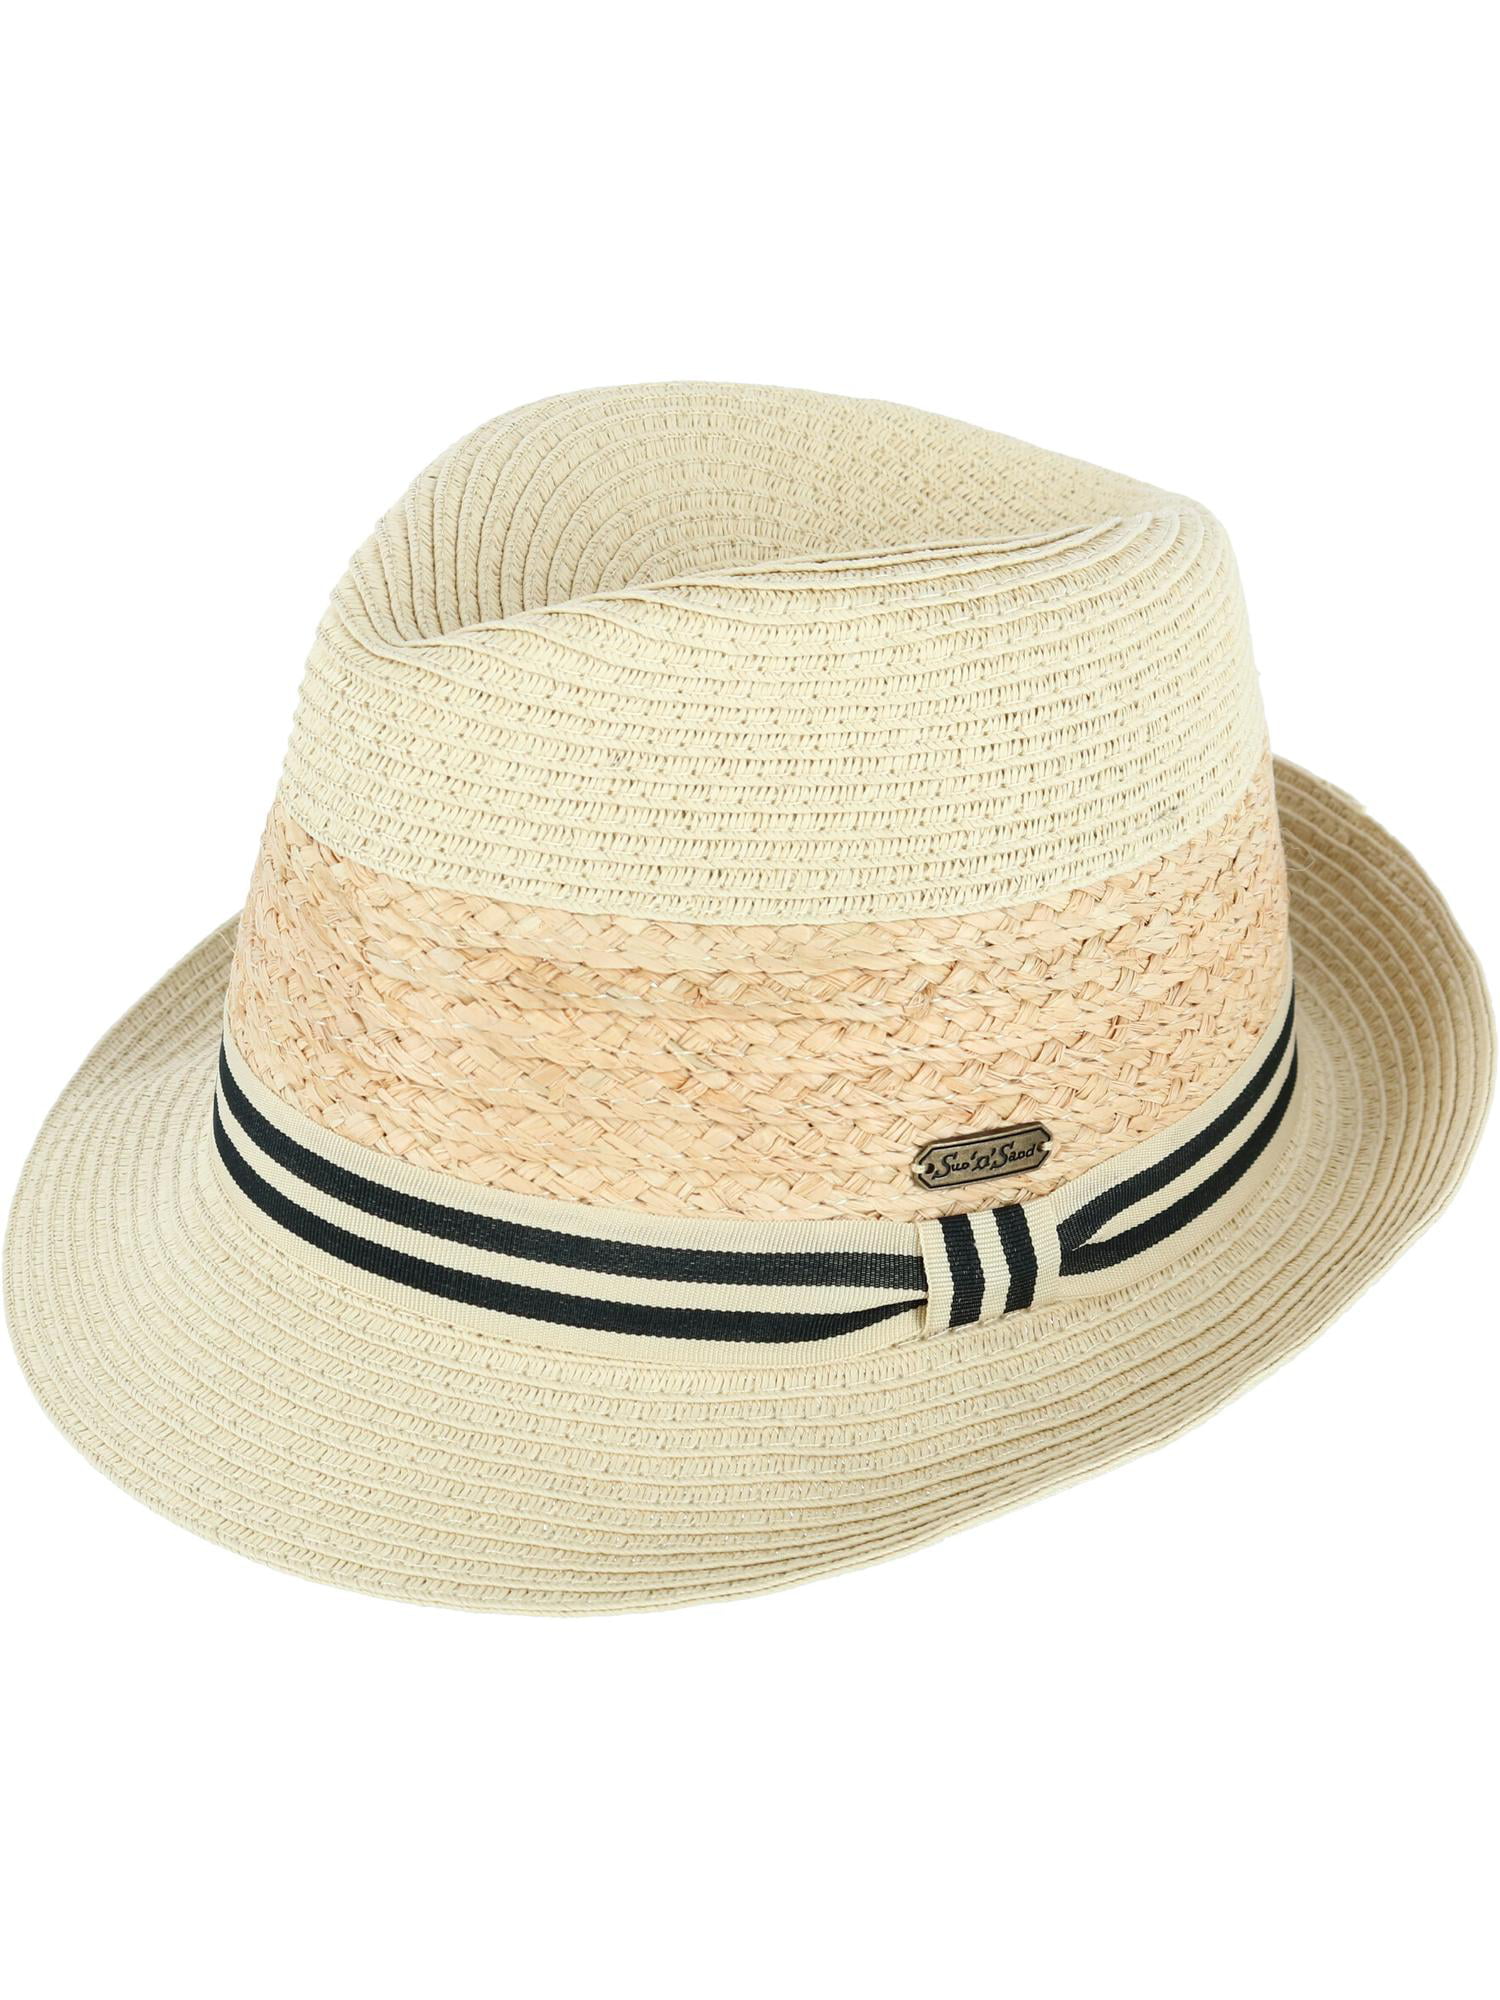 Dress Up America Black and White Striped Fedora Hat for Kids and Adults 786138800070